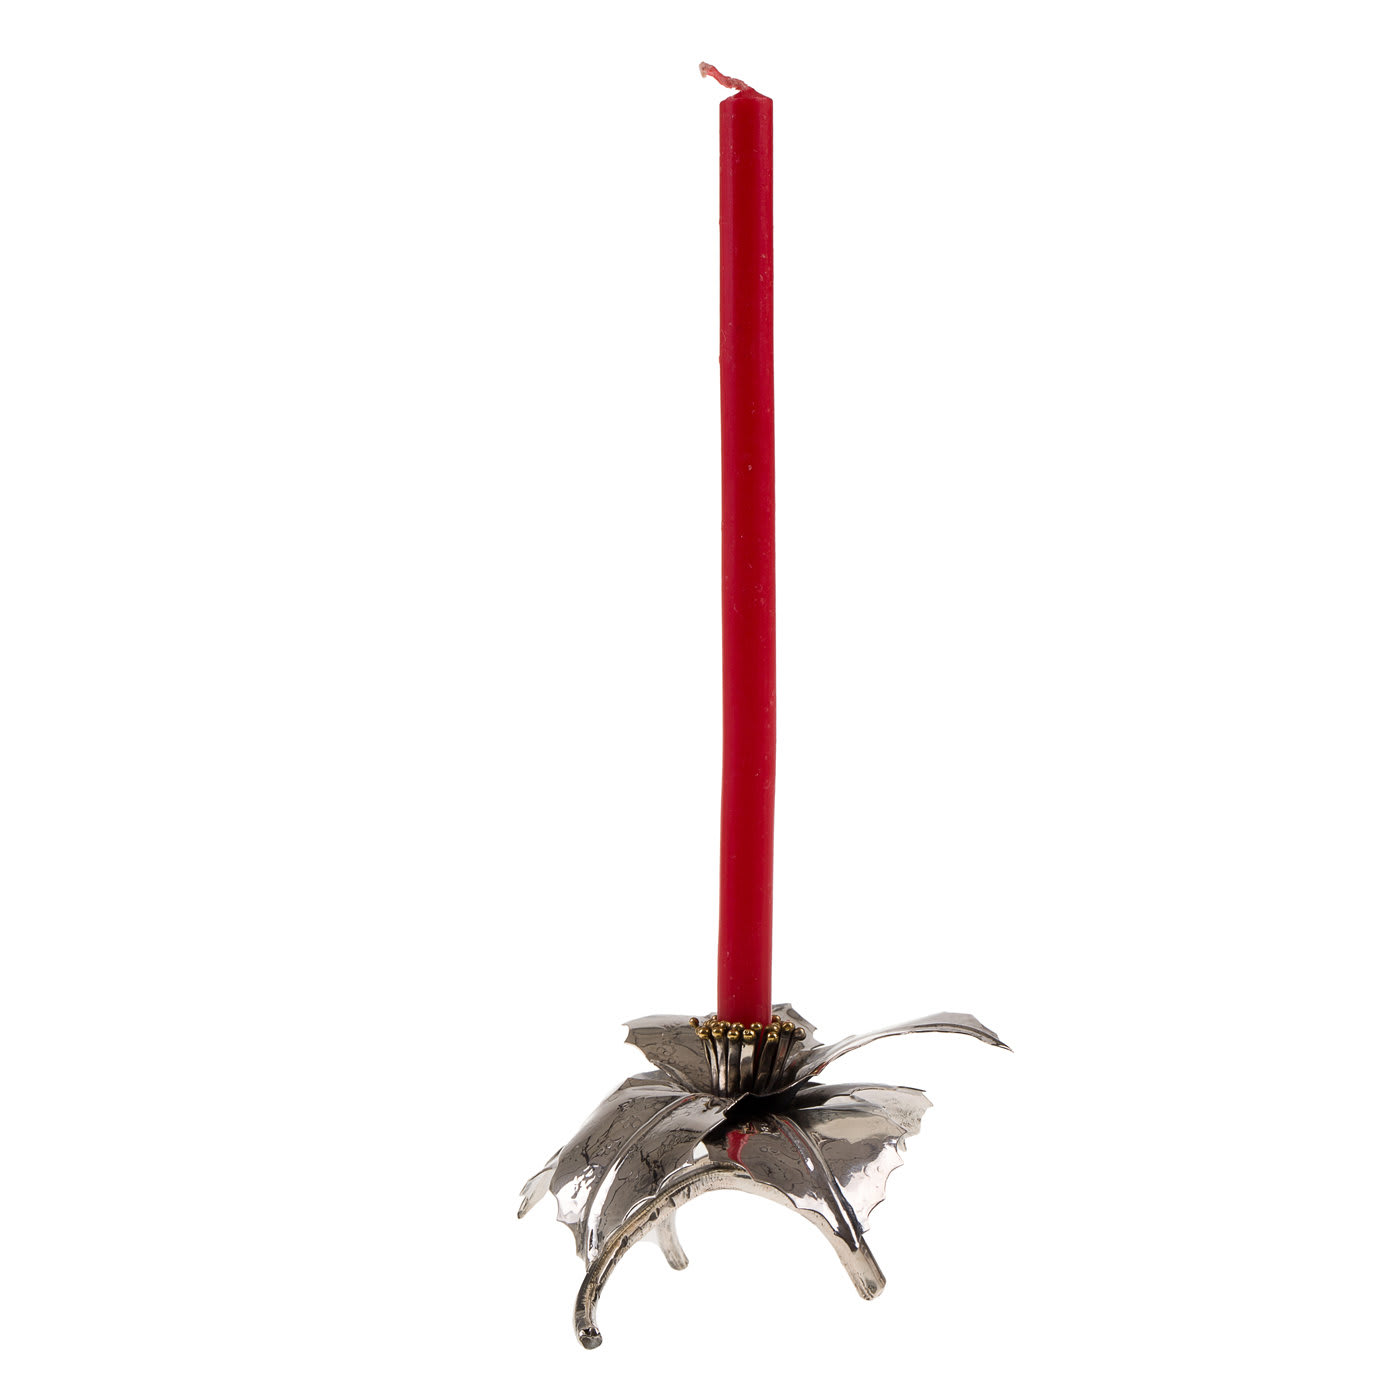 Holly Sterling Silver Candle Holder - Fratelli Lisi